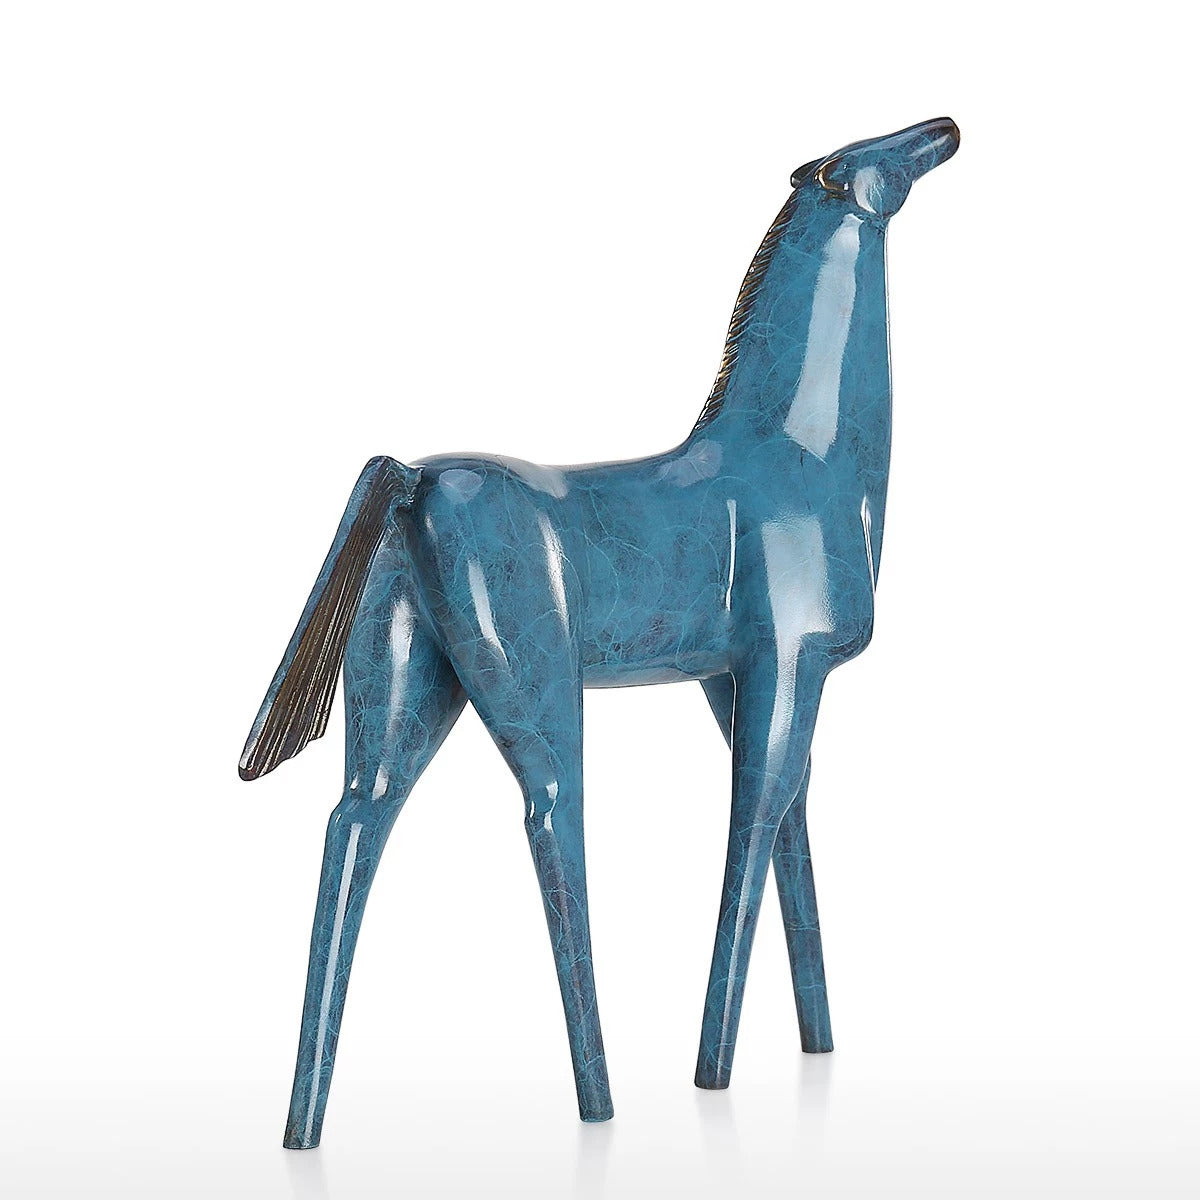 Horse Sculpture and Horse Ornaments For Horse Decor and Horse Gifts